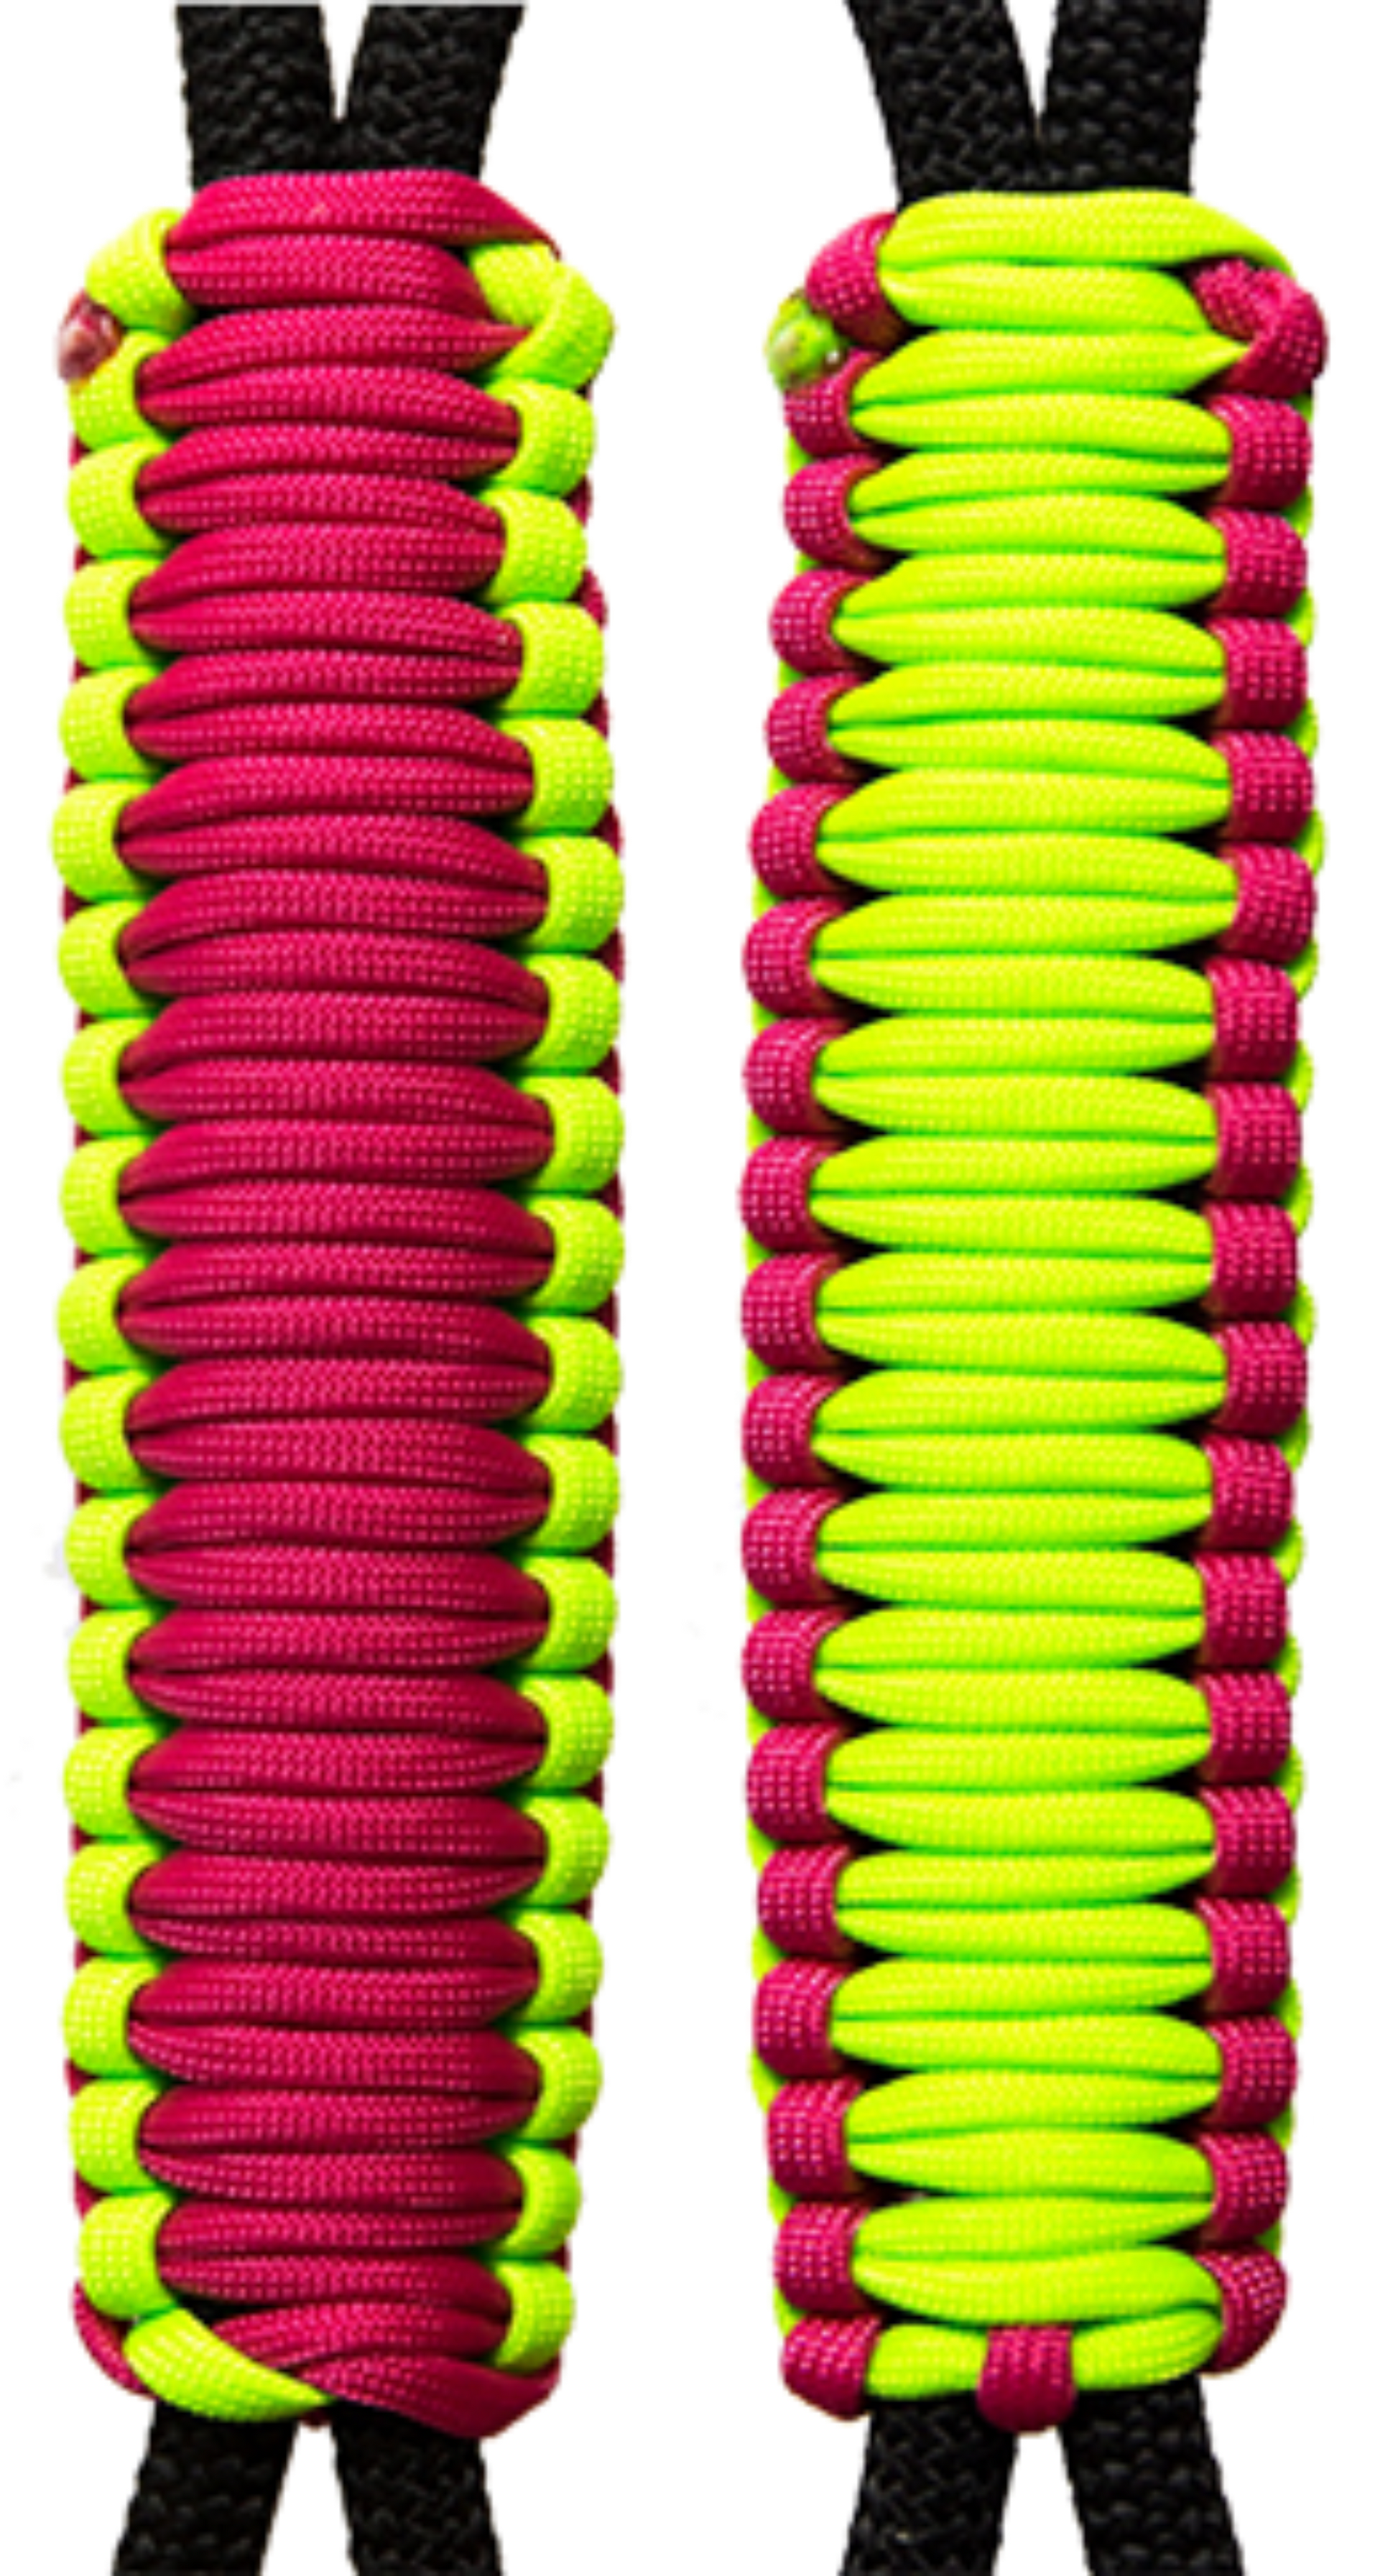 Fuchsia & Neon Green  C010C023 - Paracord Handmade Handles for Stainless Steel Tumblers - Made in USA!